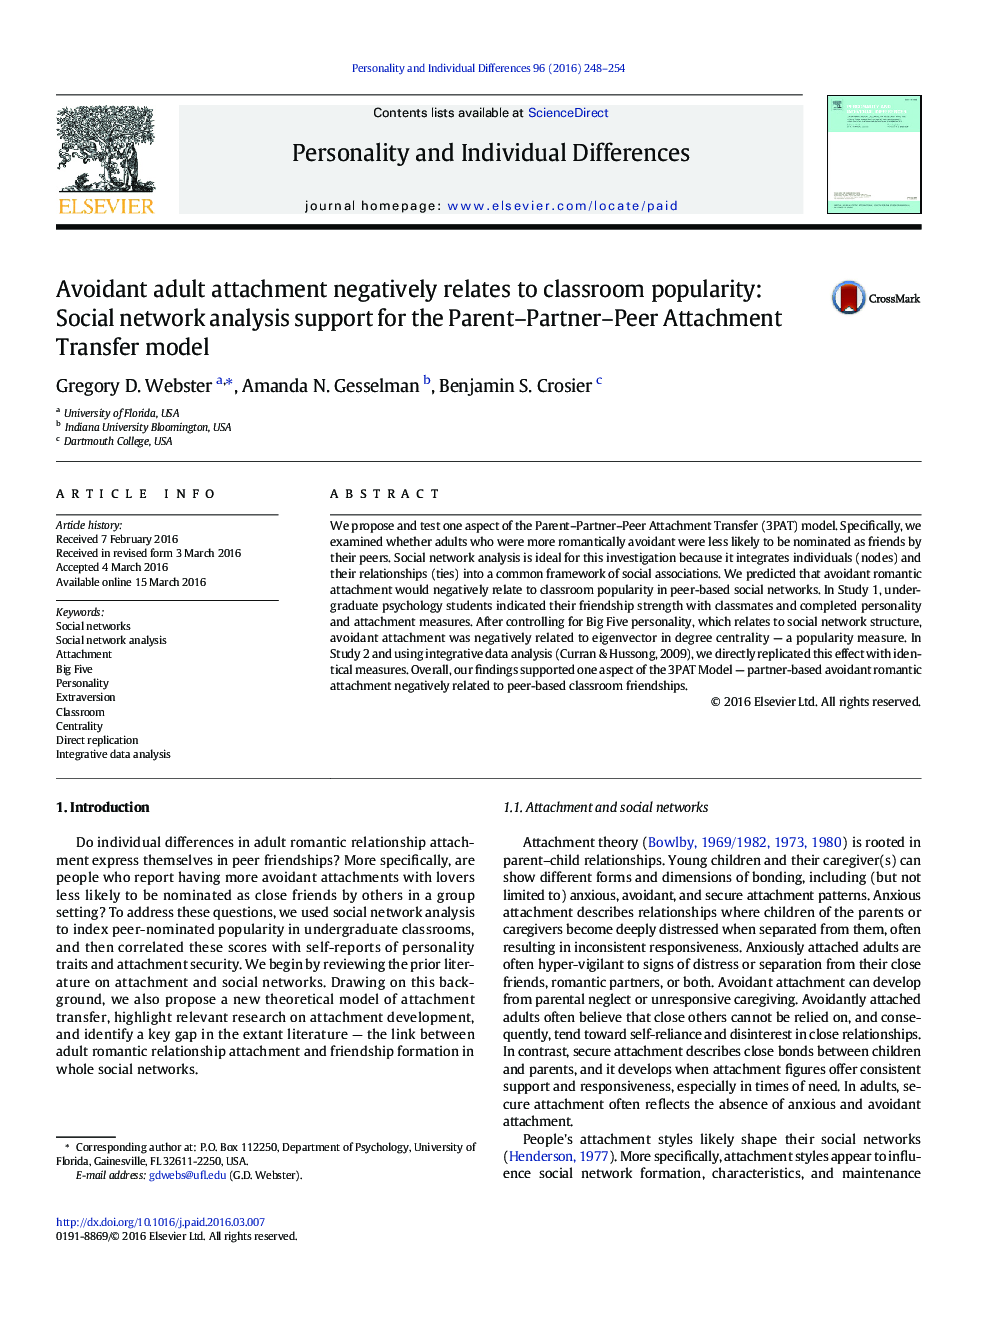 Avoidant adult attachment negatively relates to classroom popularity: Social network analysis support for the Parent-Partner-Peer Attachment Transfer model